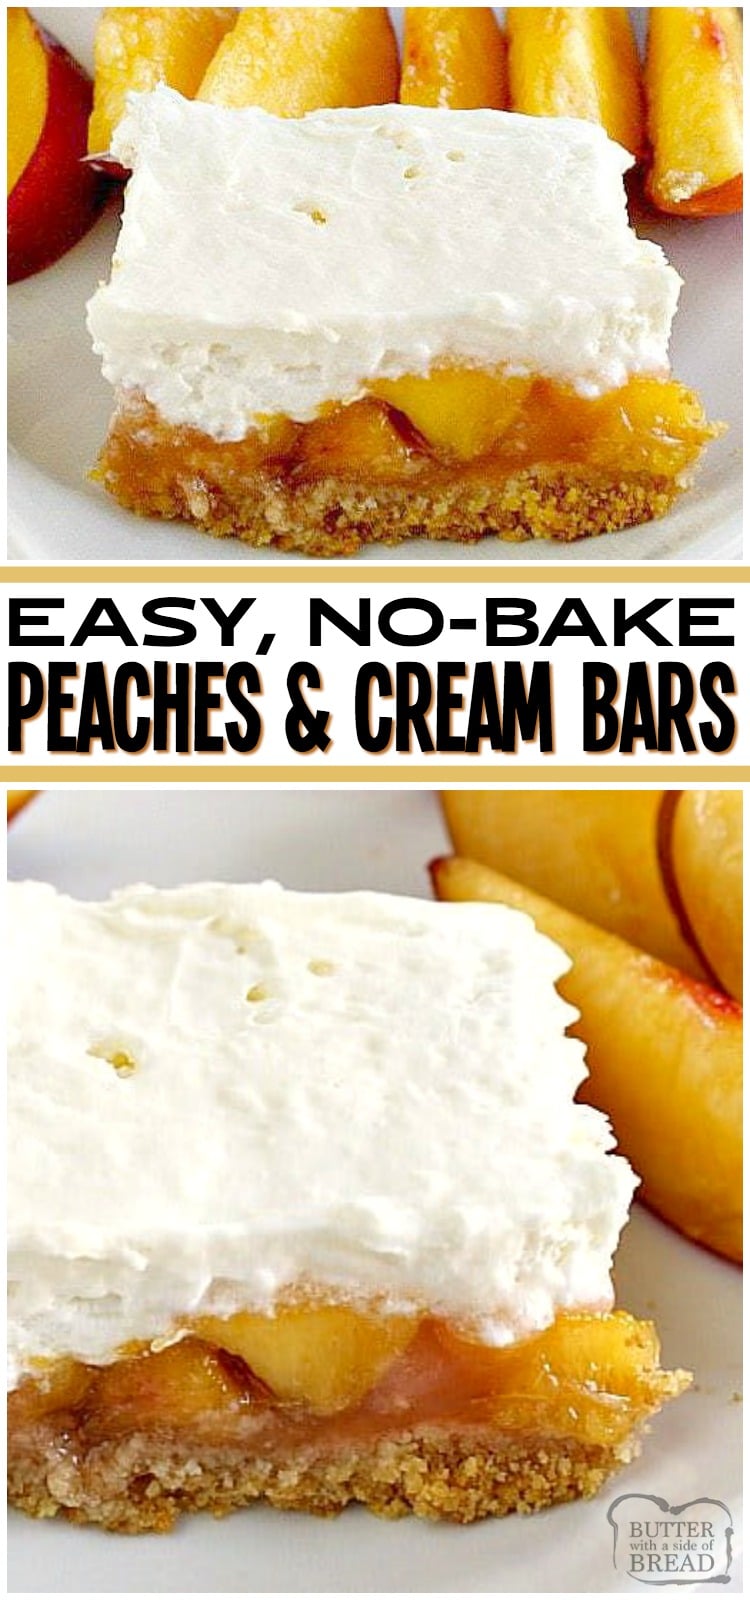 No-Bake Peaches & Cream Bars are one of my favorite fresh peach dessert recipes! Made with peach jello, cream cheese, graham crackers and of course, fresh & juicy peaches! #peaches #peach #dessert #peachesandcream #nobake #recipe from BUTTER WITH A SIDE OF BREAD